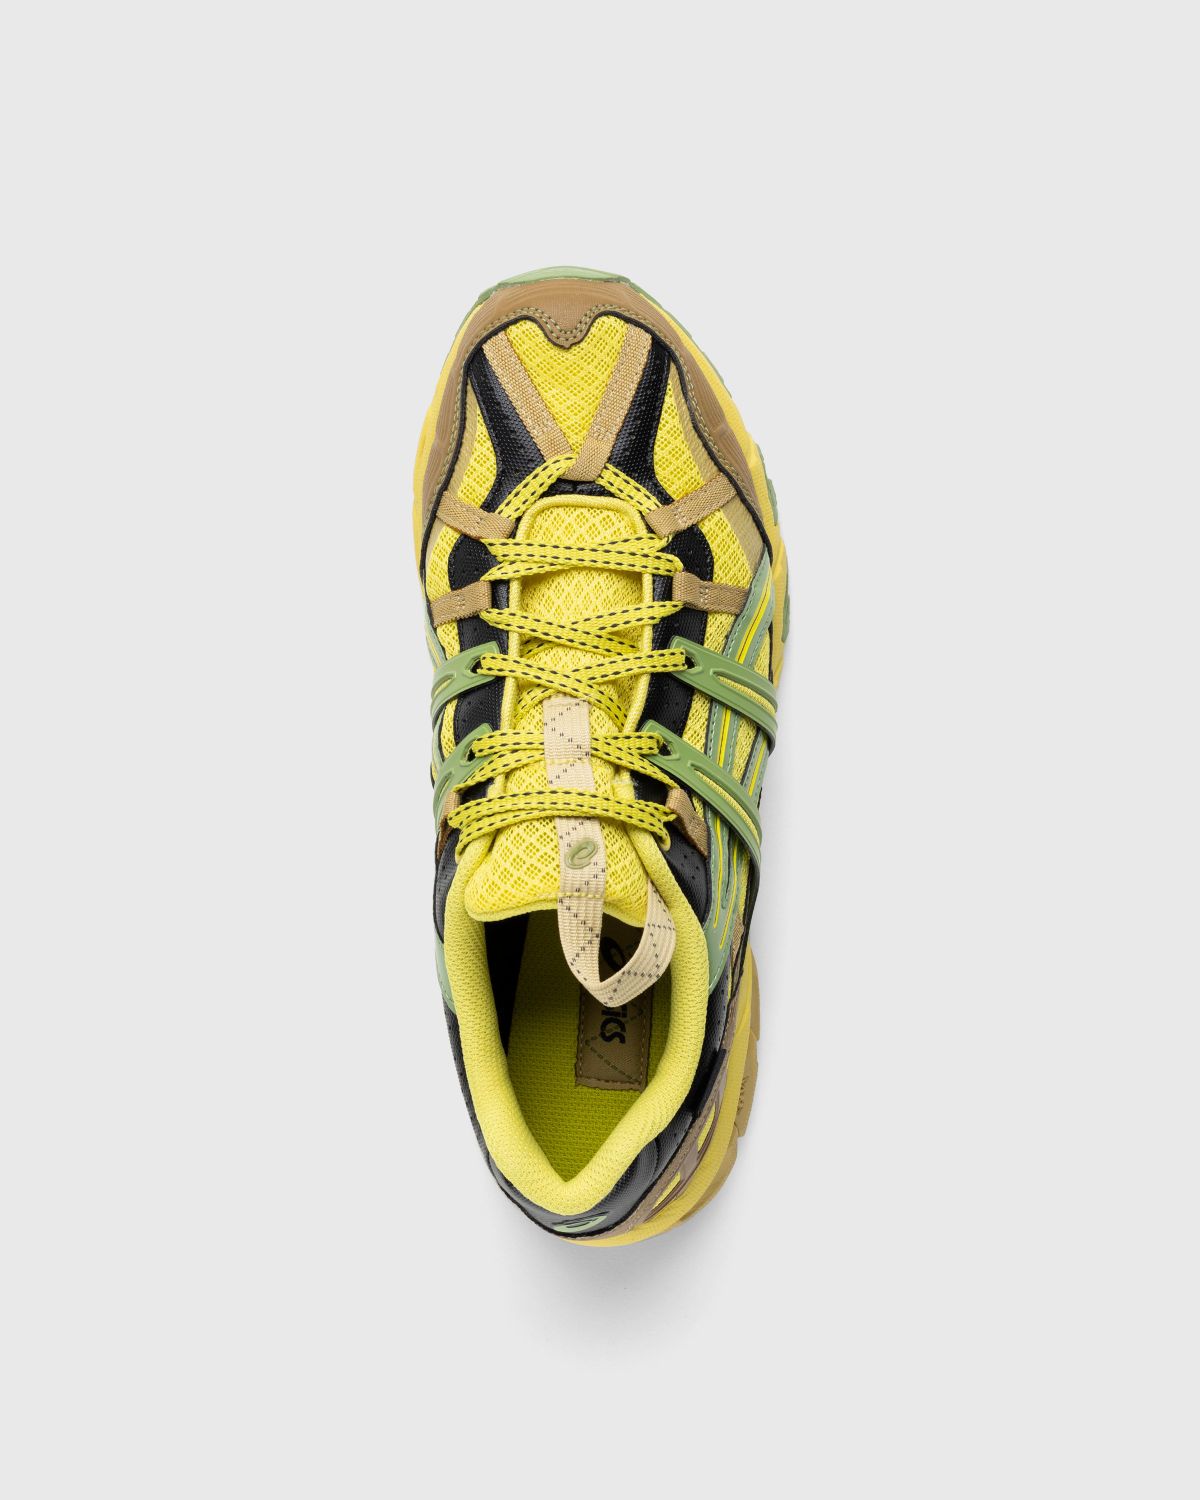 asics – HS4-S GEL-SONOMA 15-50 GTX Green Sheen/Espom - Low Top Sneakers - Yellow - Image 5